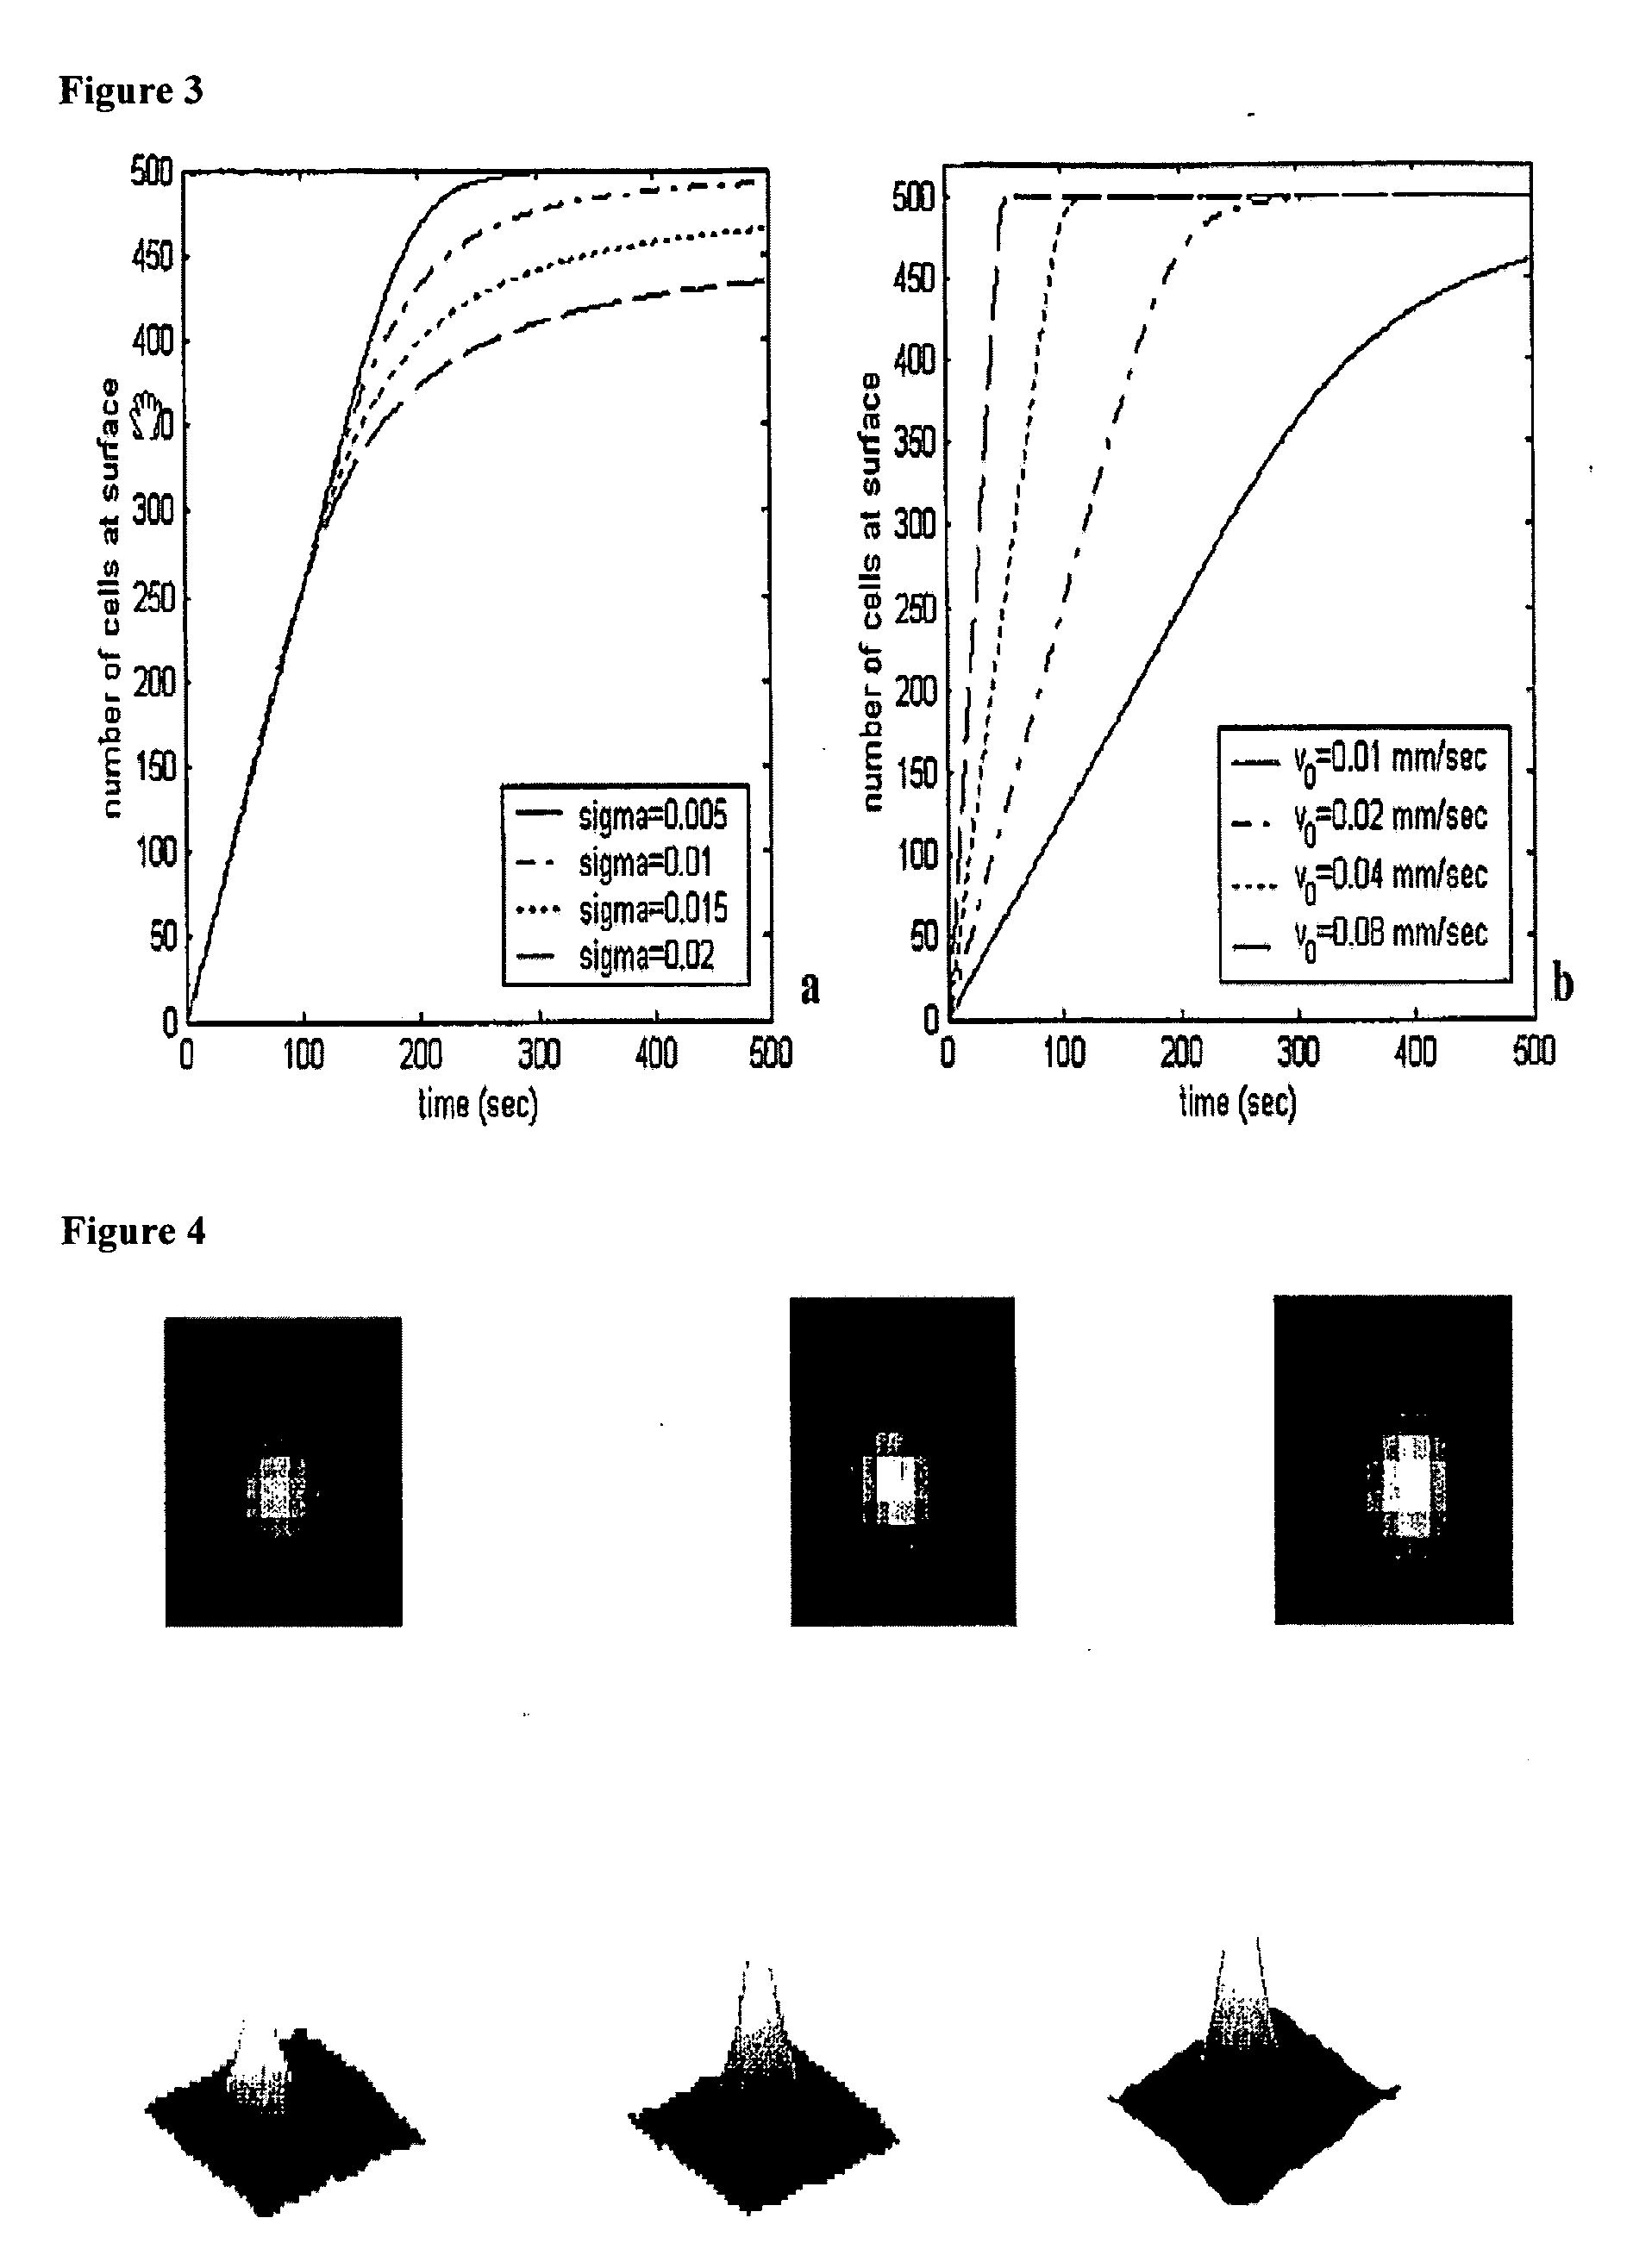 Methods and algorithms for cell enumeration in low-cost cytometer